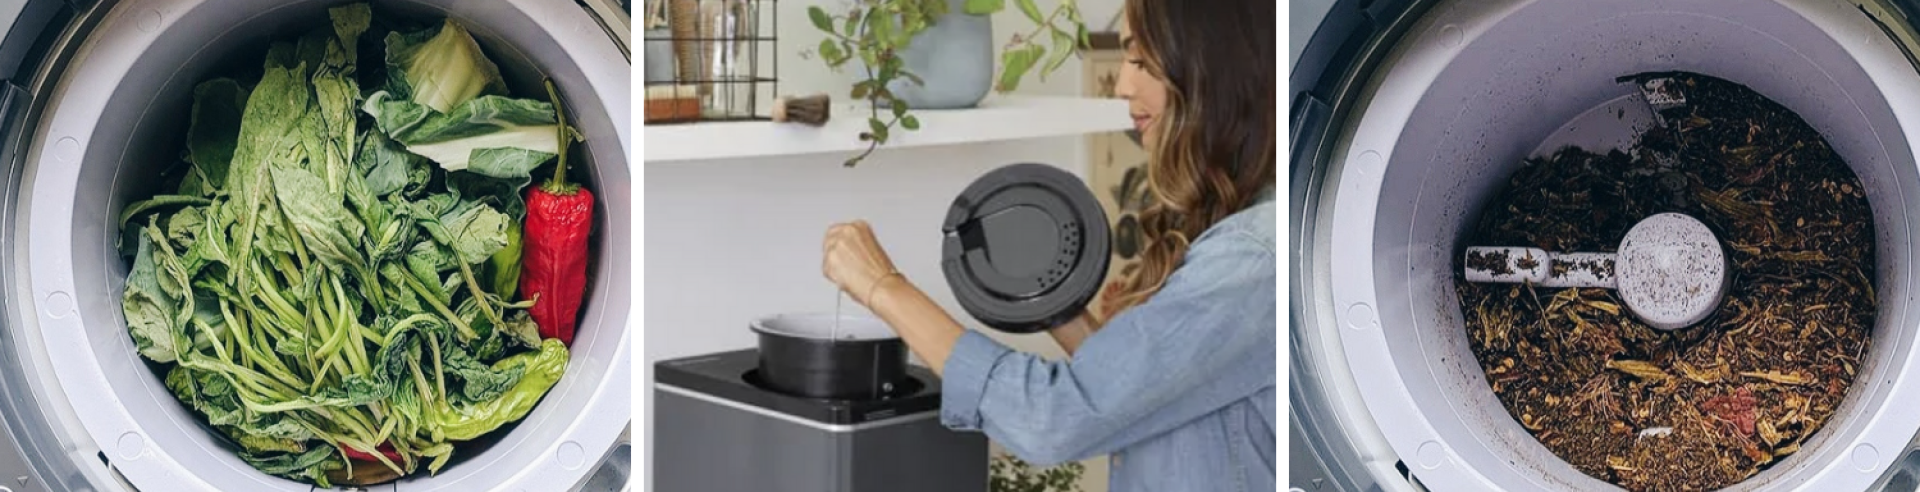 Putting food in electronic Composter